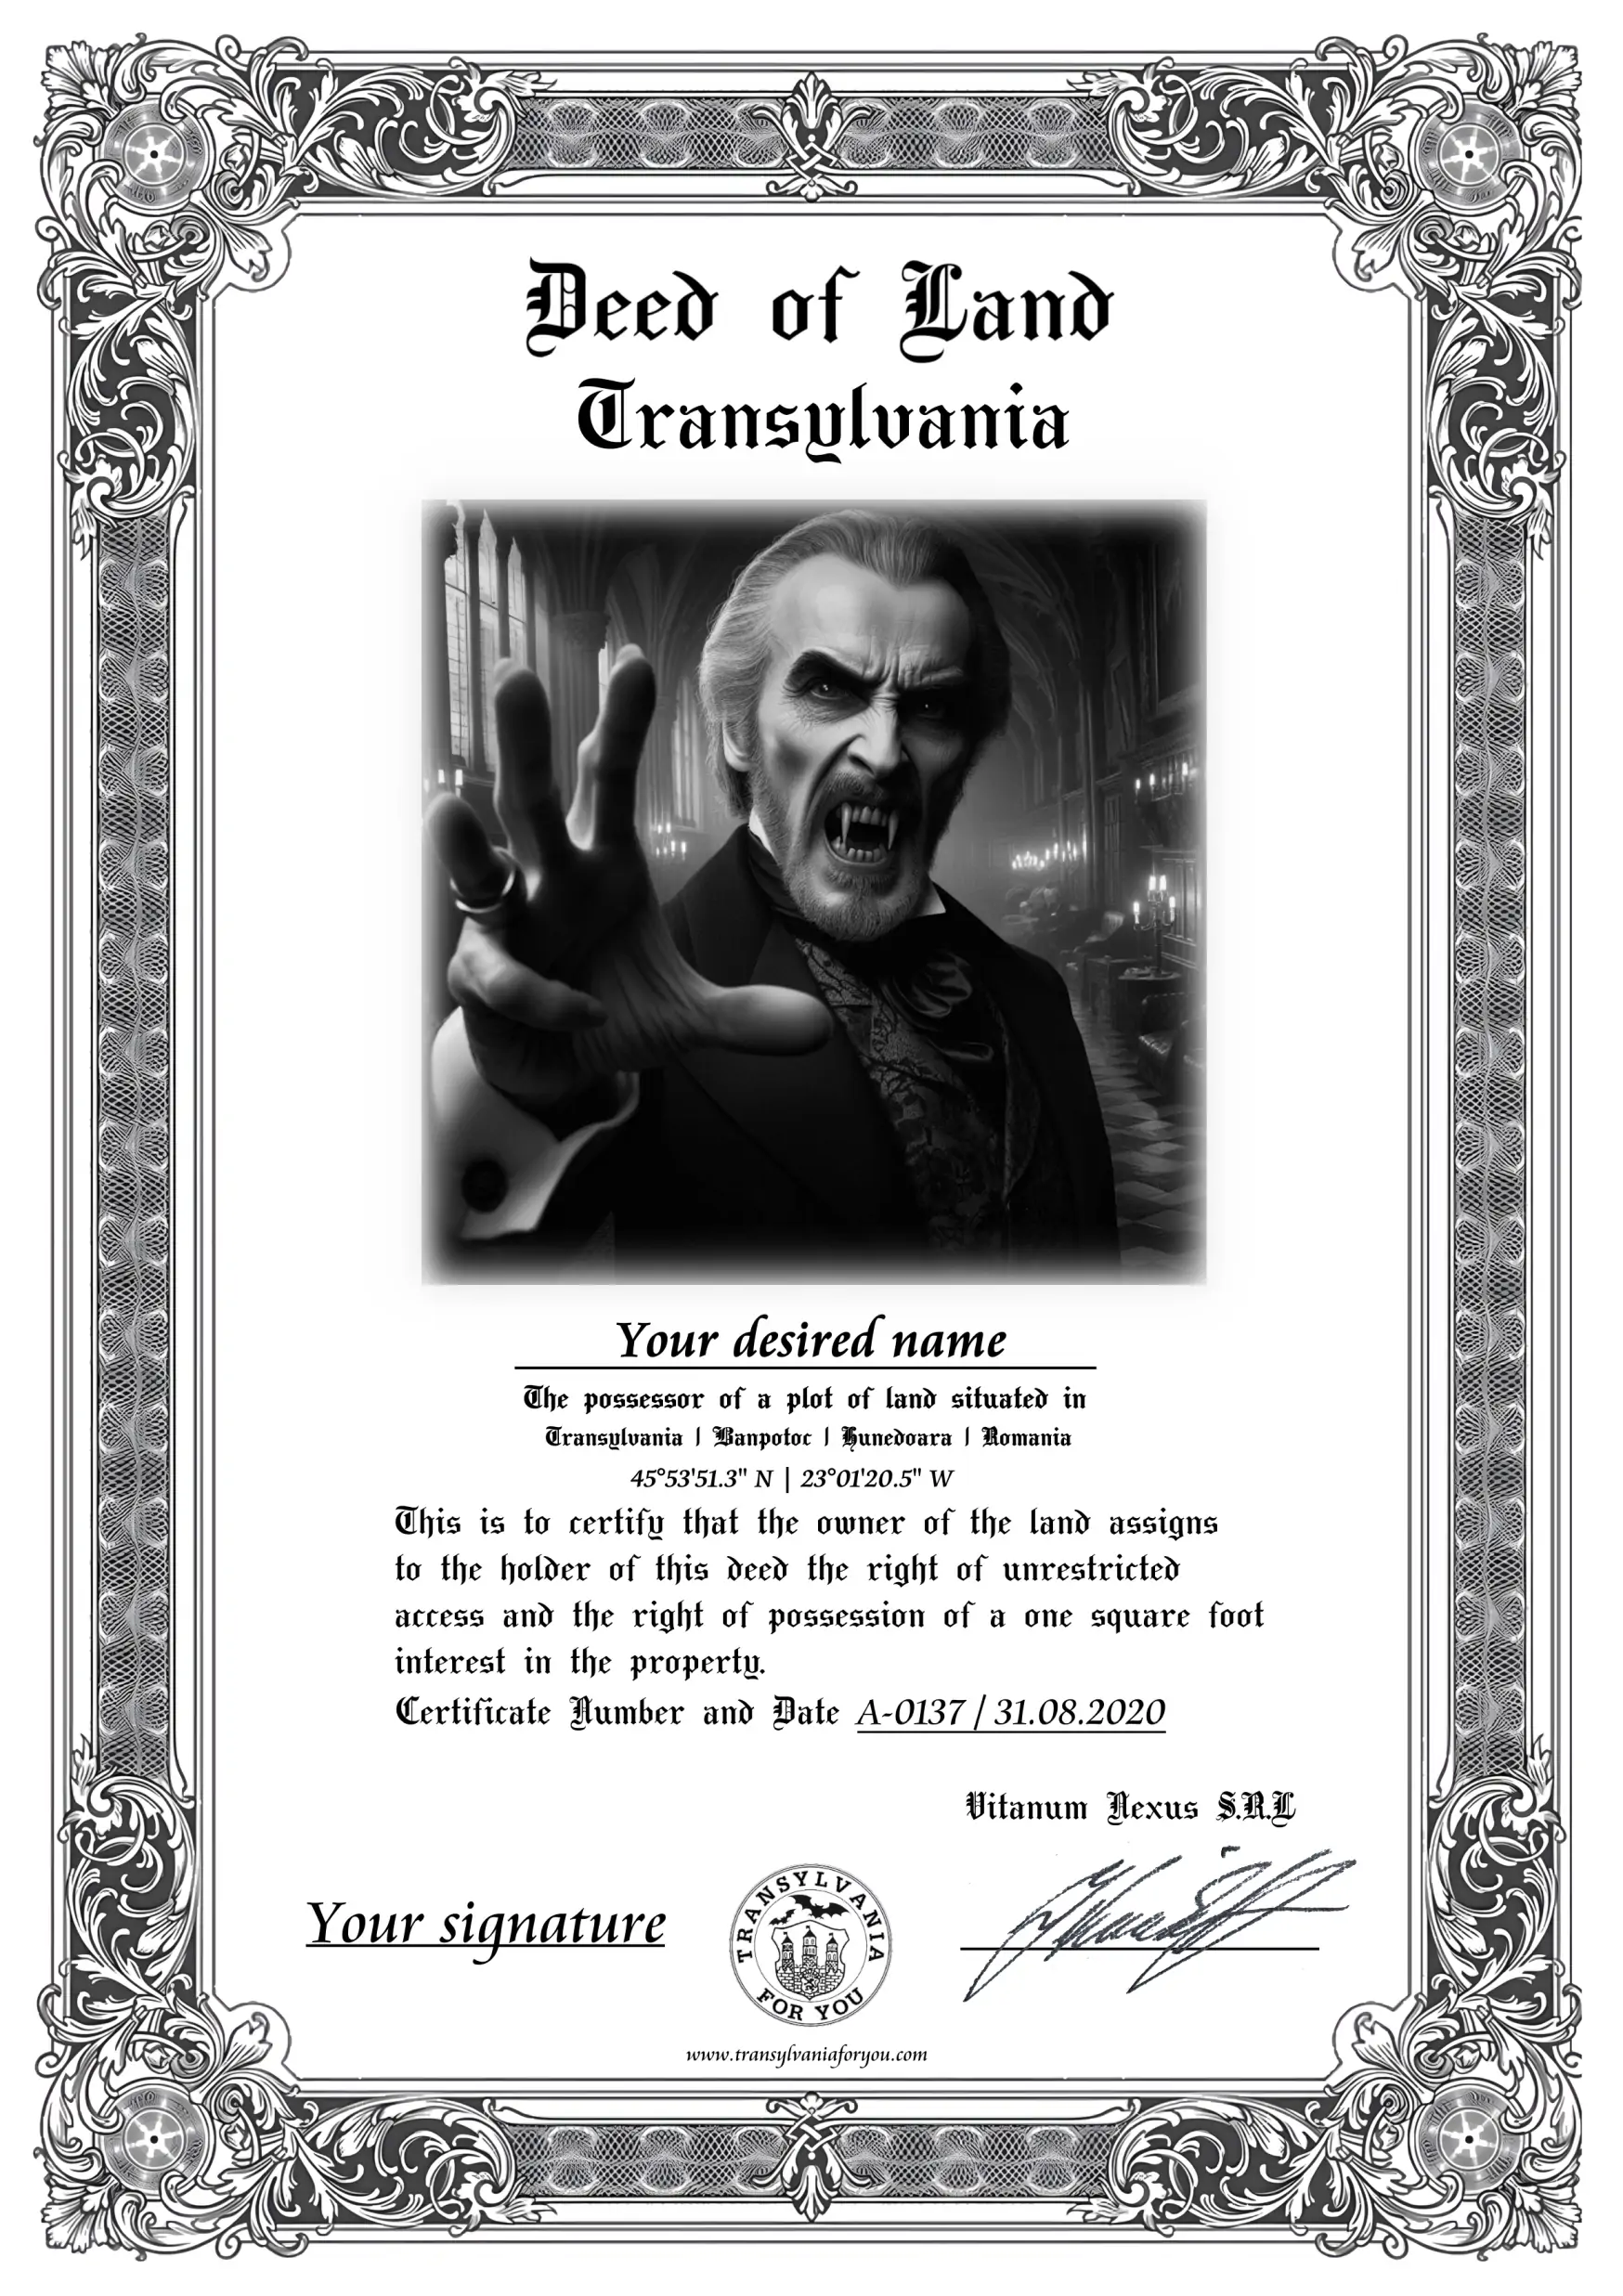 Count Dracula, Christopher Lee